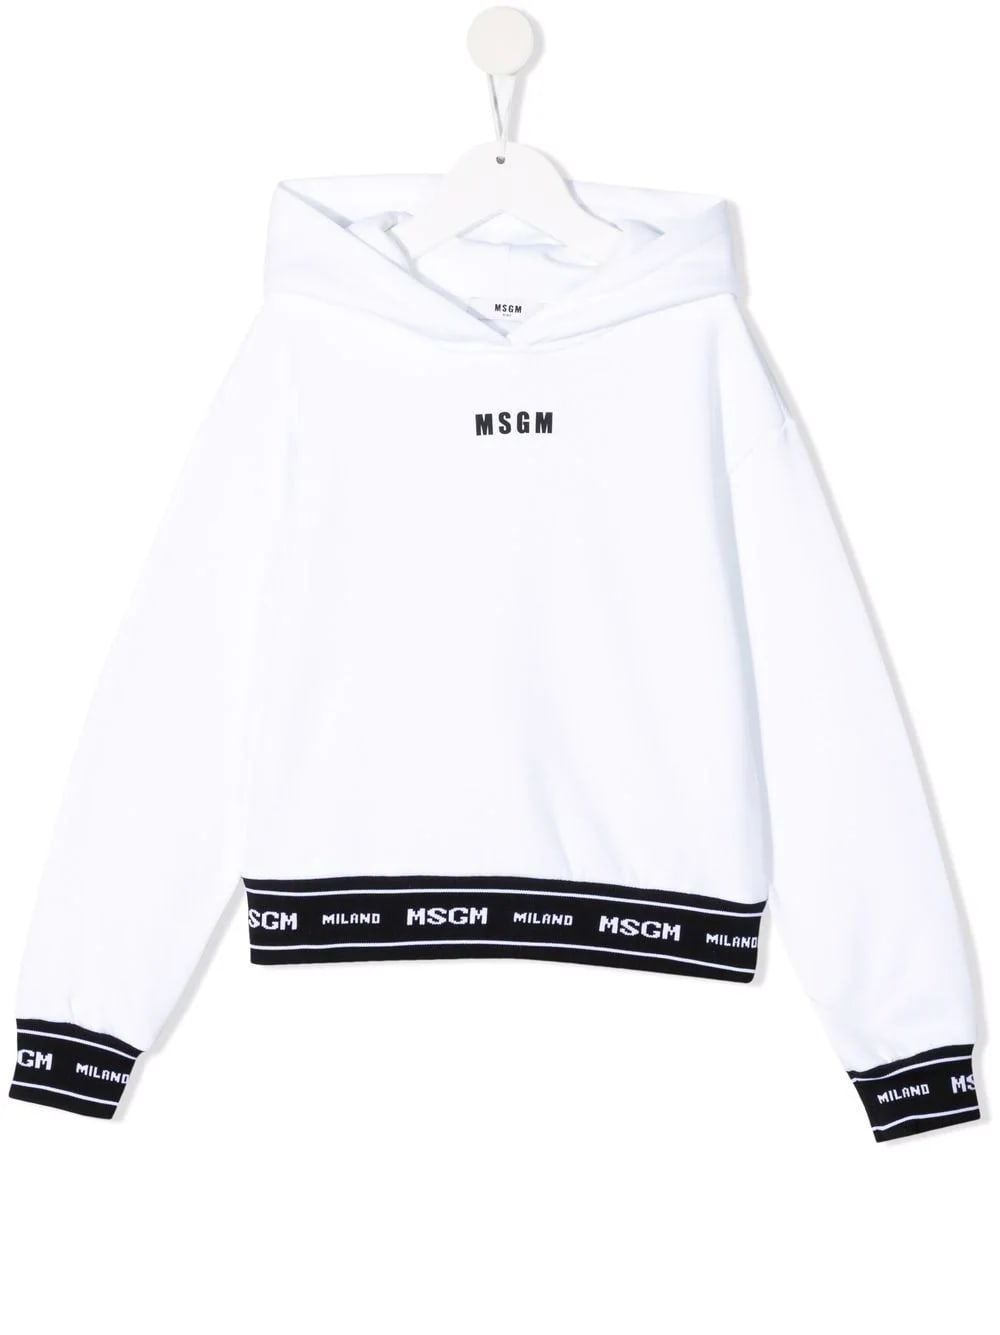 MSGM White Hoodie With Black Logoed Ribbons